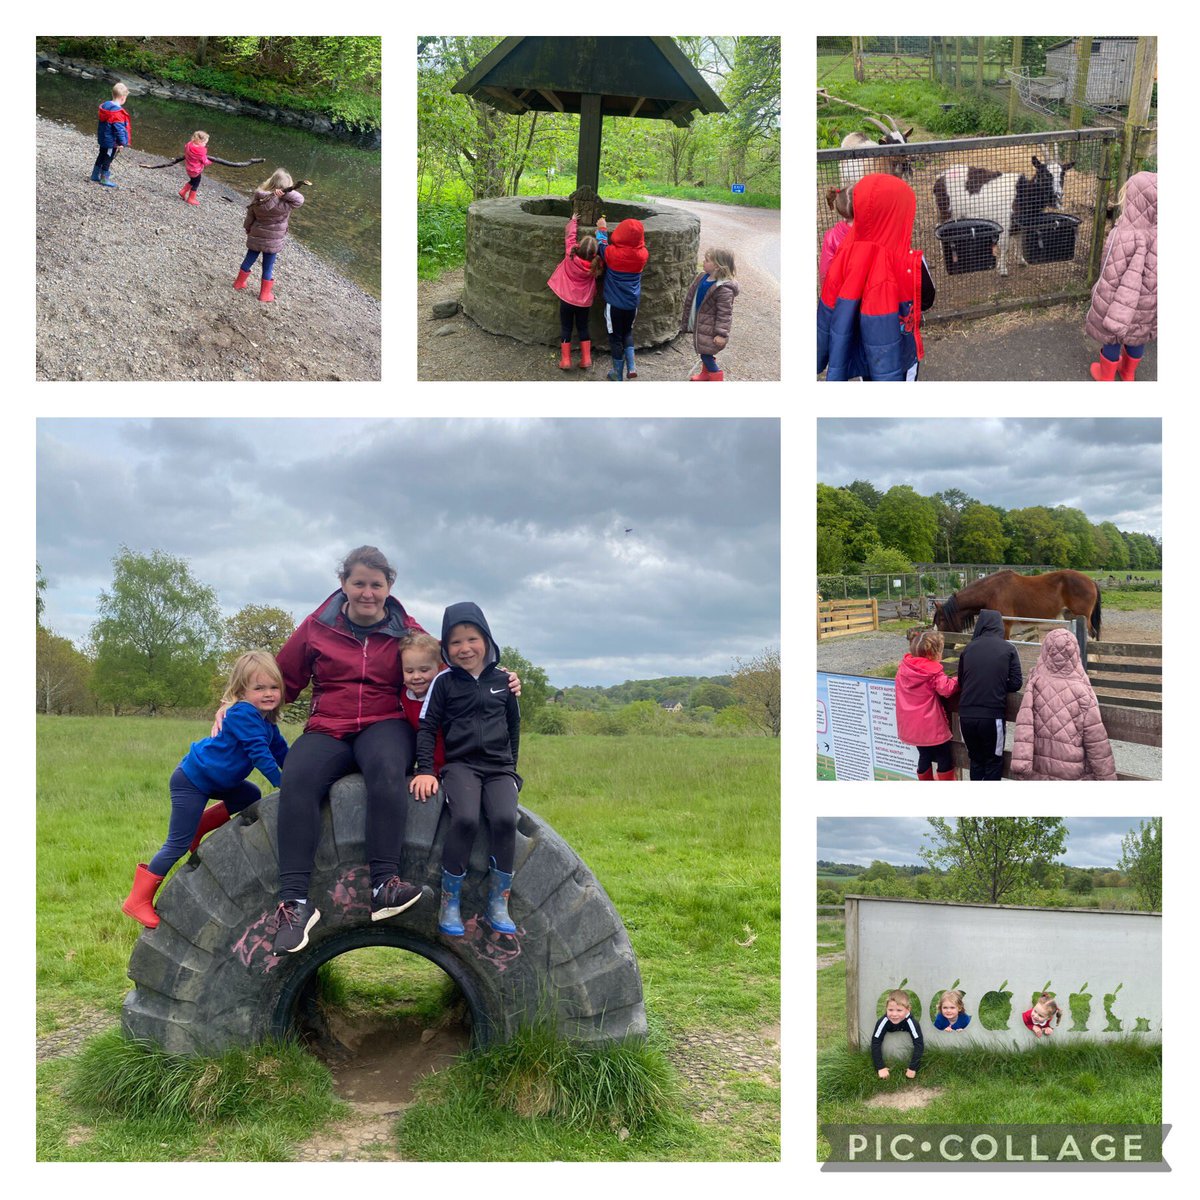 Fab day at Muiravonside country park. We seen all the animals, checked out a wishing well, played at the park, chilled by the river Avon, had a tasty lunch and plenty climbing. Wow! isn’t that a fun filled day? #Adventures #Nature #Slowpedagogy #ExploreMoreAtADLC